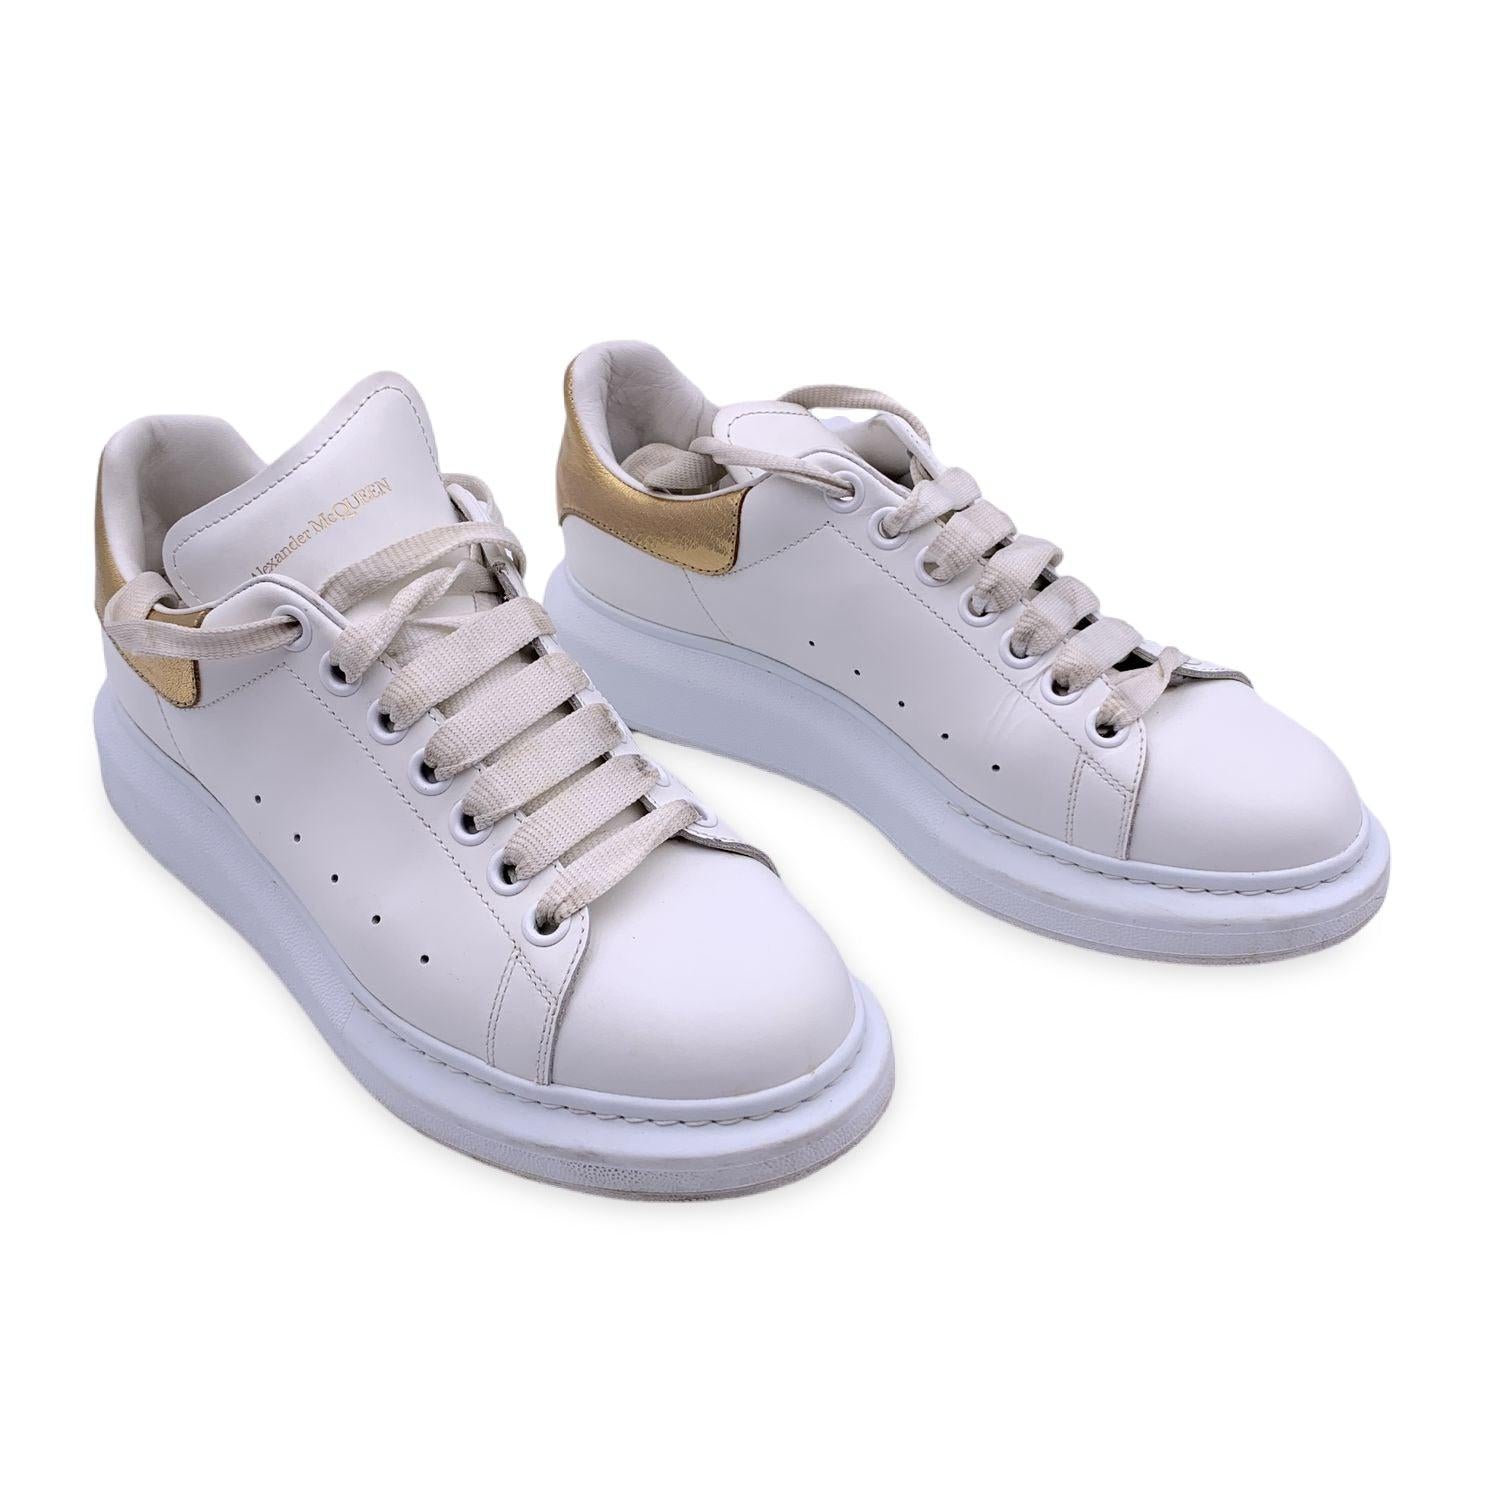 White sneakers in smooth calfskin by Alexander McQueen. They feature laces, round oversized rubber toe and gold metal details on the back. Perforated finish on the outside. Leather lined interior. 7 metal holes. Flat laces. Alexander McQueen logo on